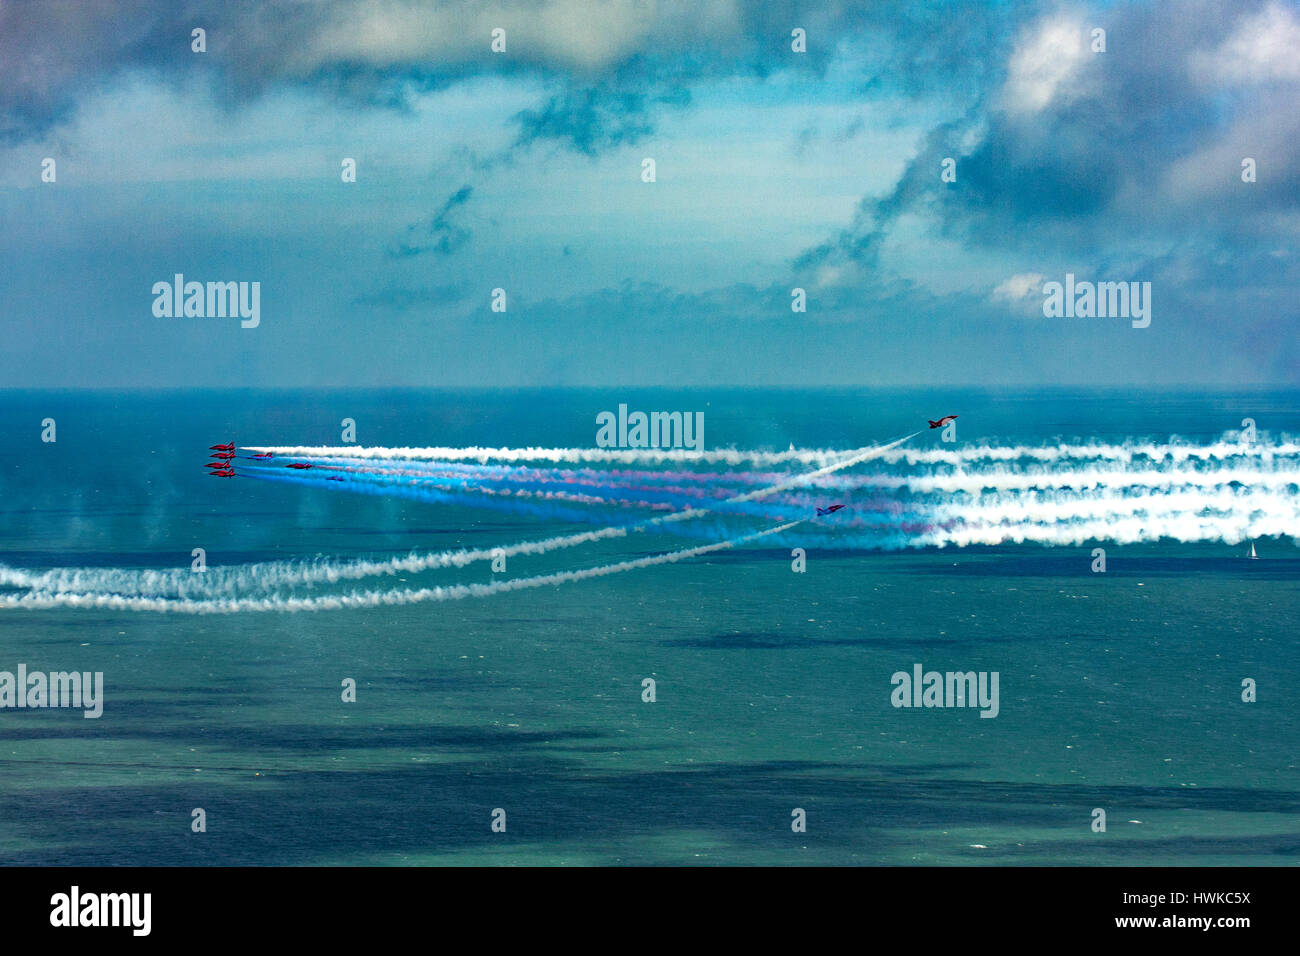 Royal Air Force Red Arrows performing display at Eastbourne Air Show 2015, East Sussex , UK Stock Photo